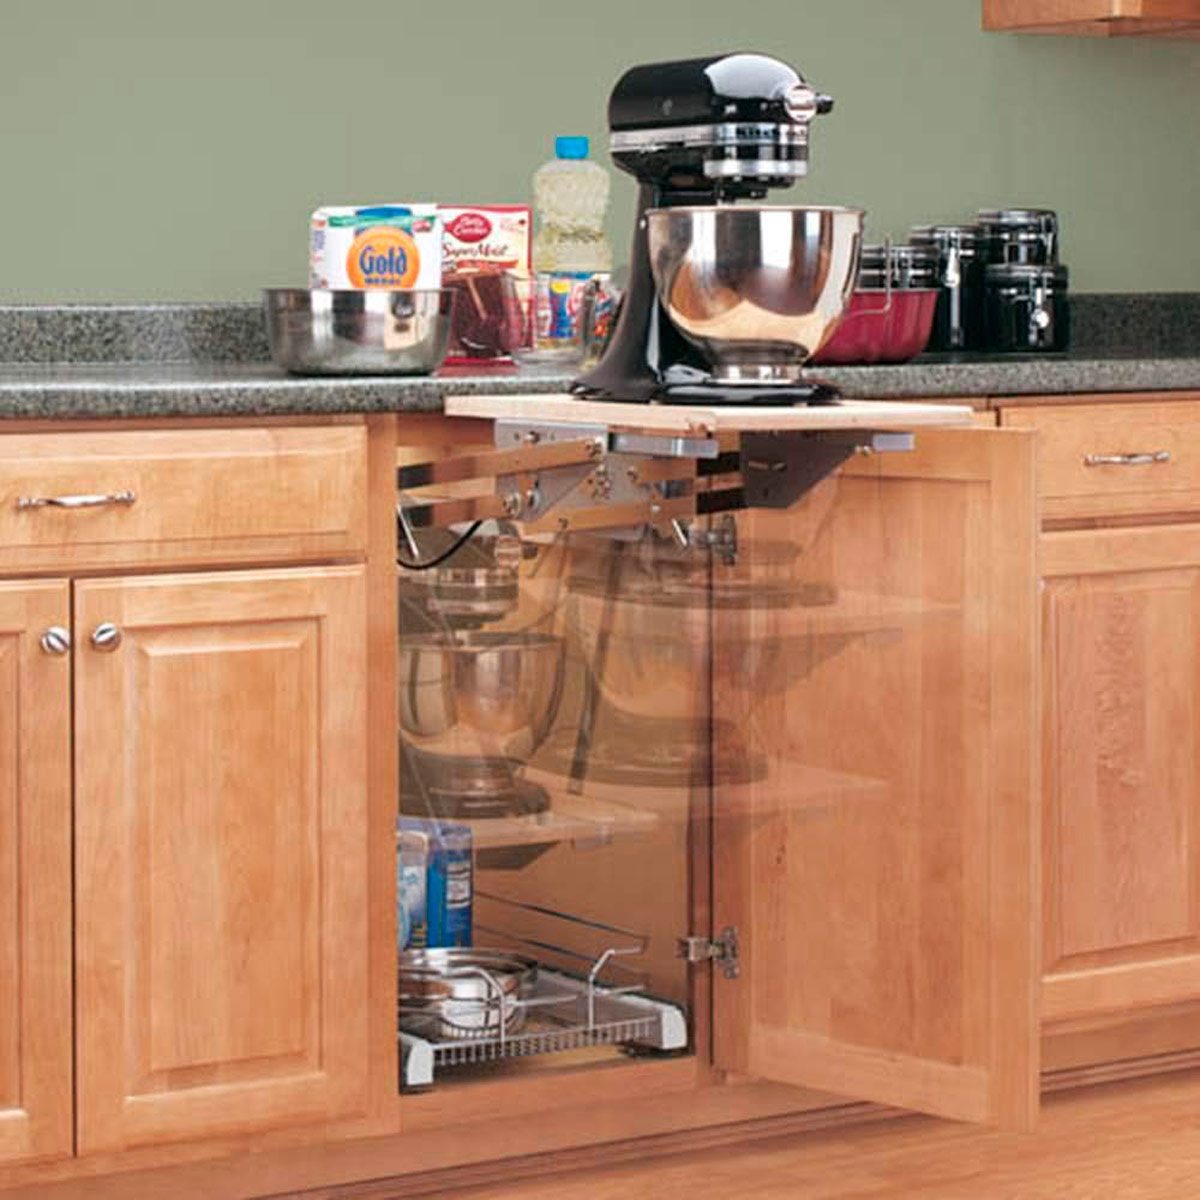 Hidden Kitchen Storage: How to Install a Motorized Lift For Small Appliances